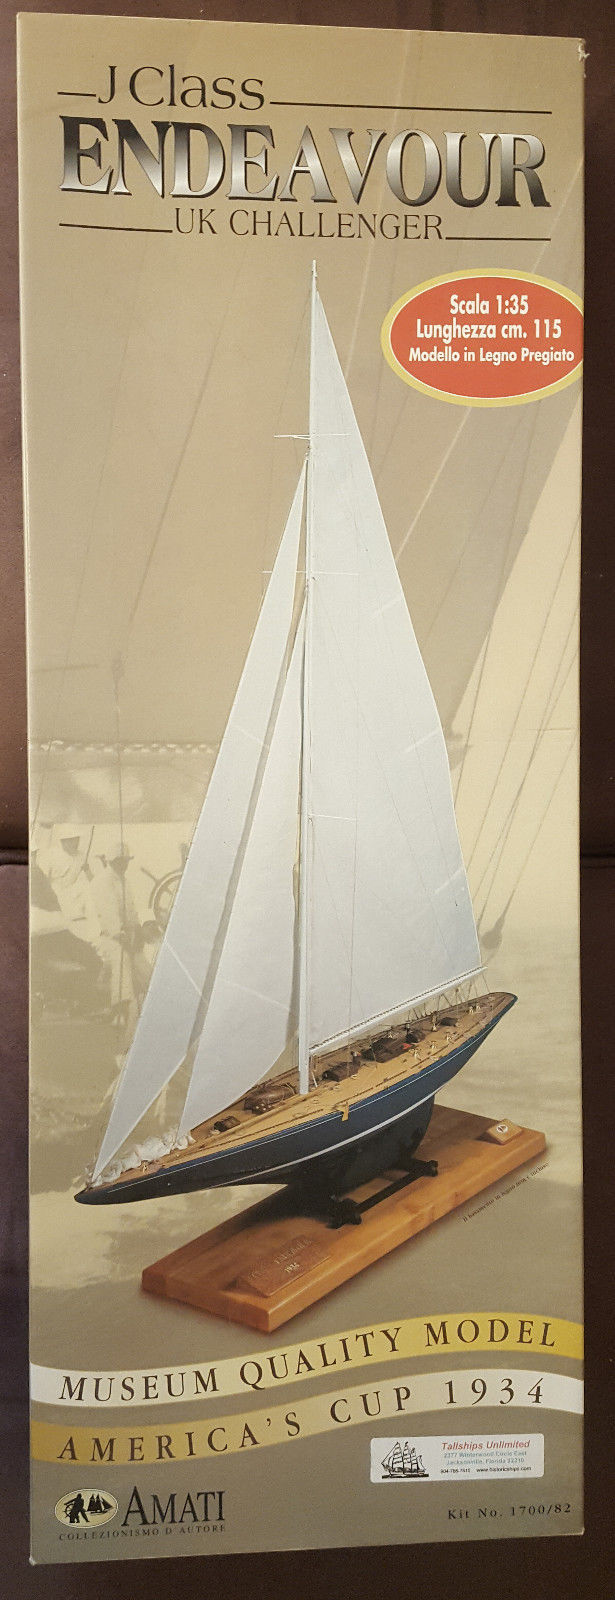 Amati, J Class Endeavour, America's Cup US 1934, 1:35 Scale Wood Model Ship Kit